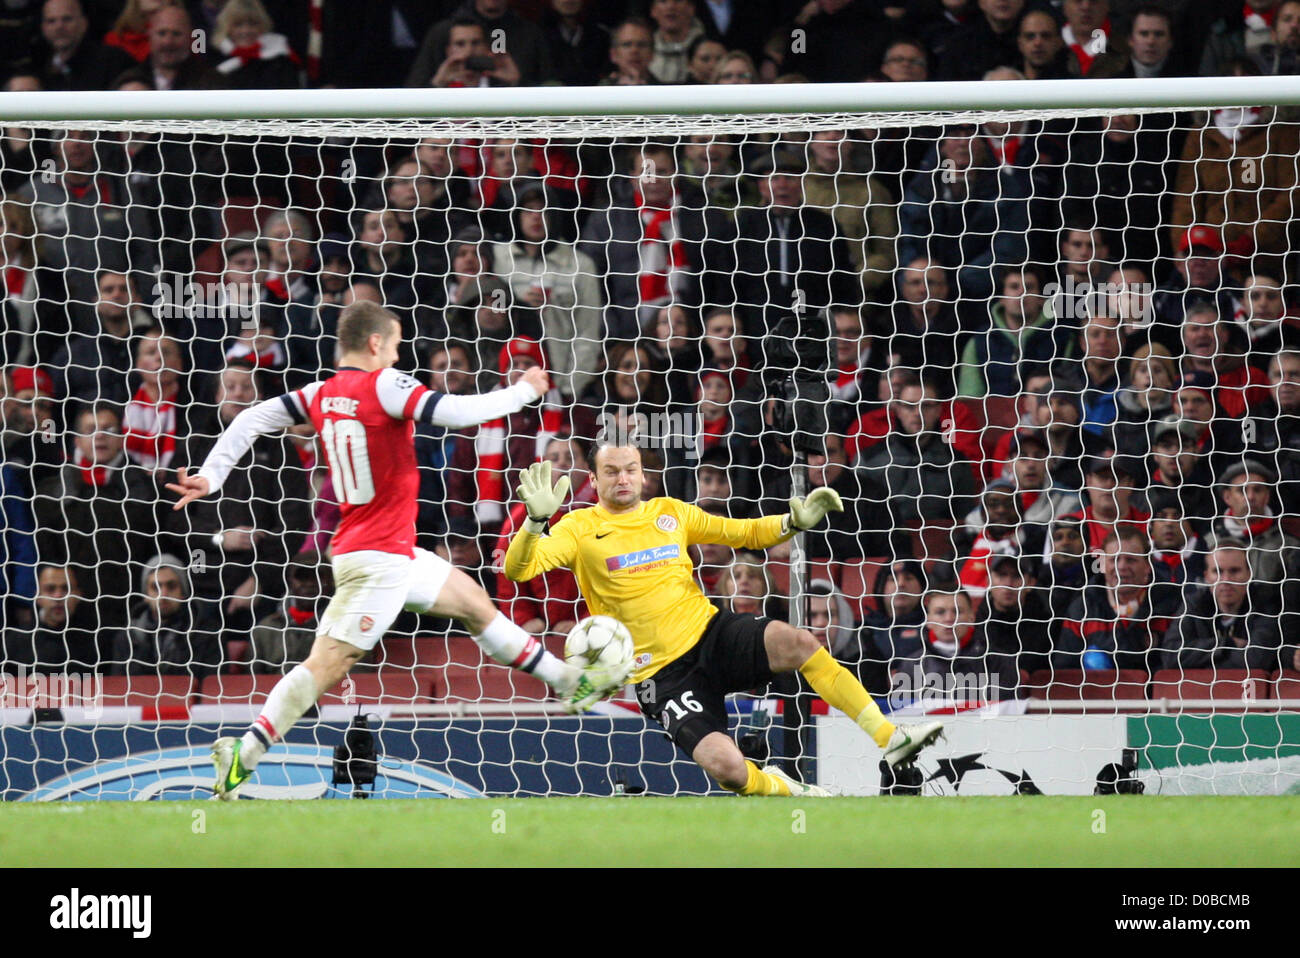 21.11.2012 London, England.  Jack Wilshere of Arsenal scores during the Champions League Group B game between Arsenal and Montpellier HSC from Emirates Stadium. Stock Photo